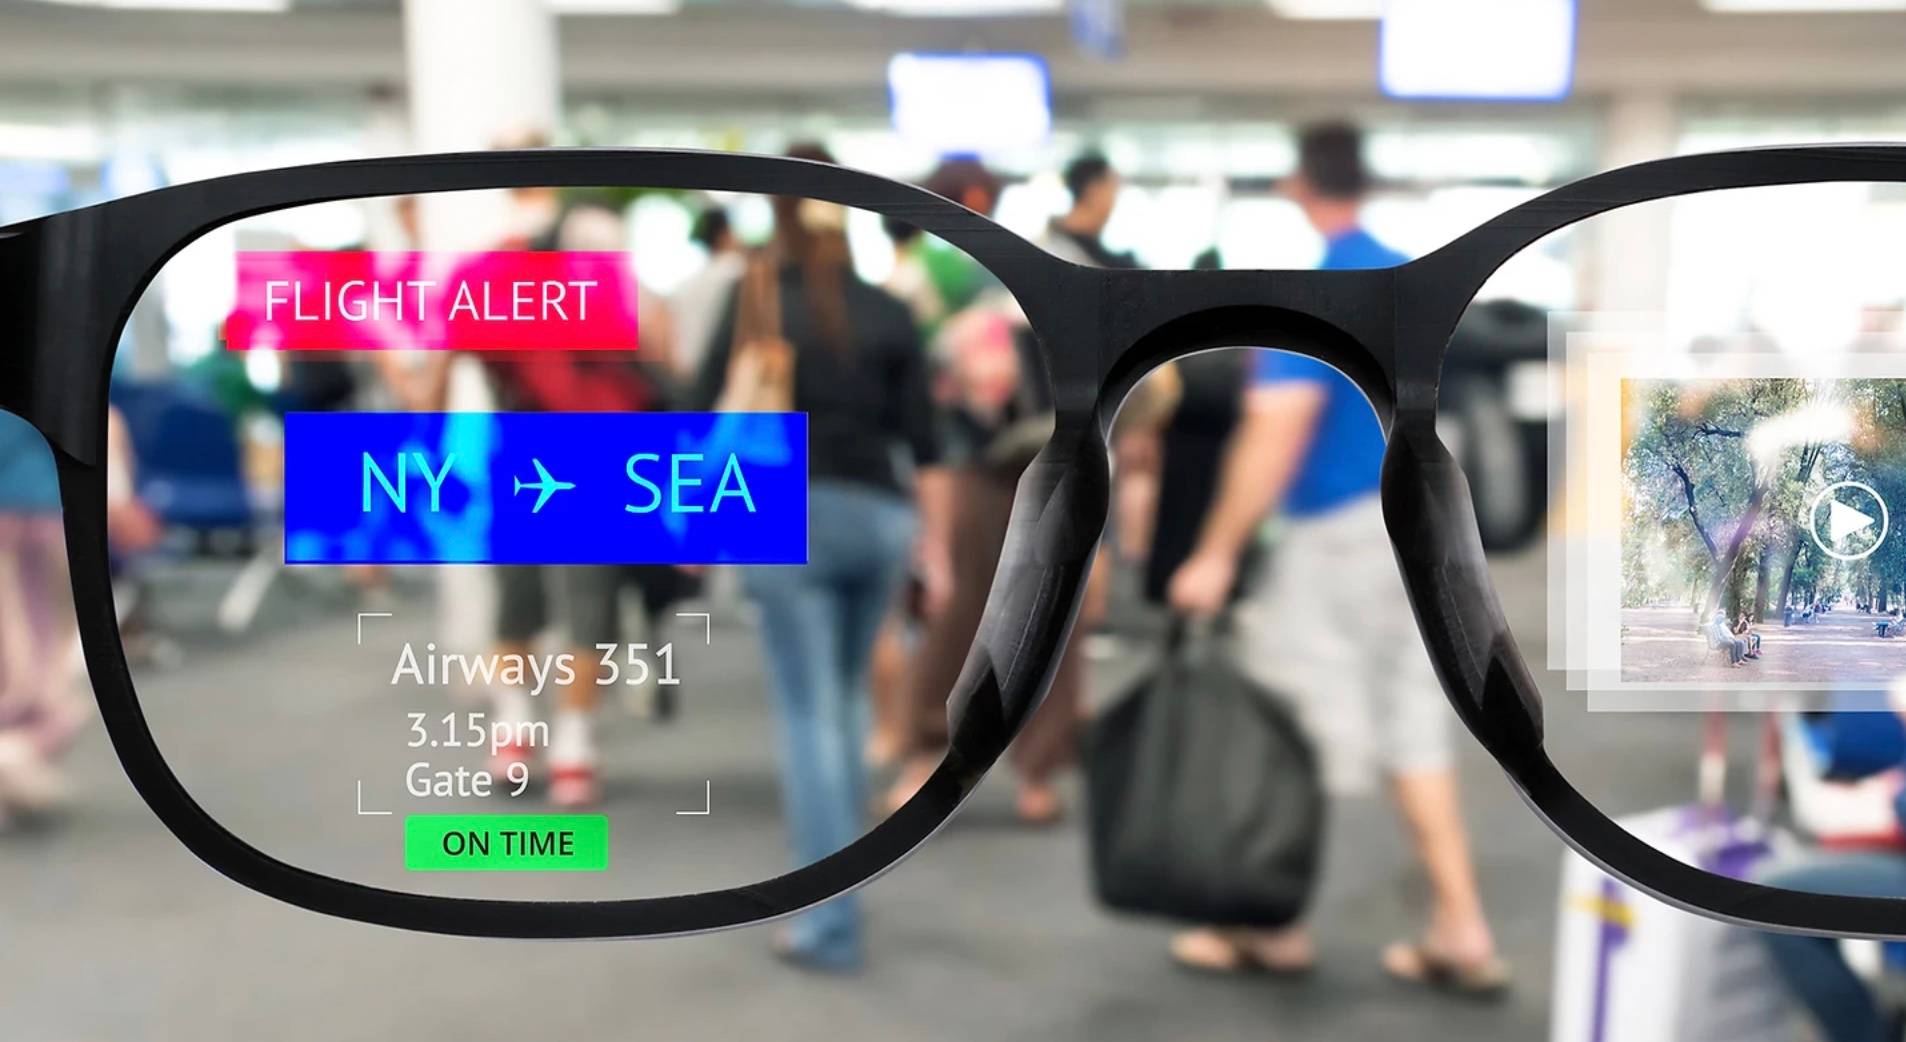 Google's latest acquisition reflects its growing interest in AR hardware